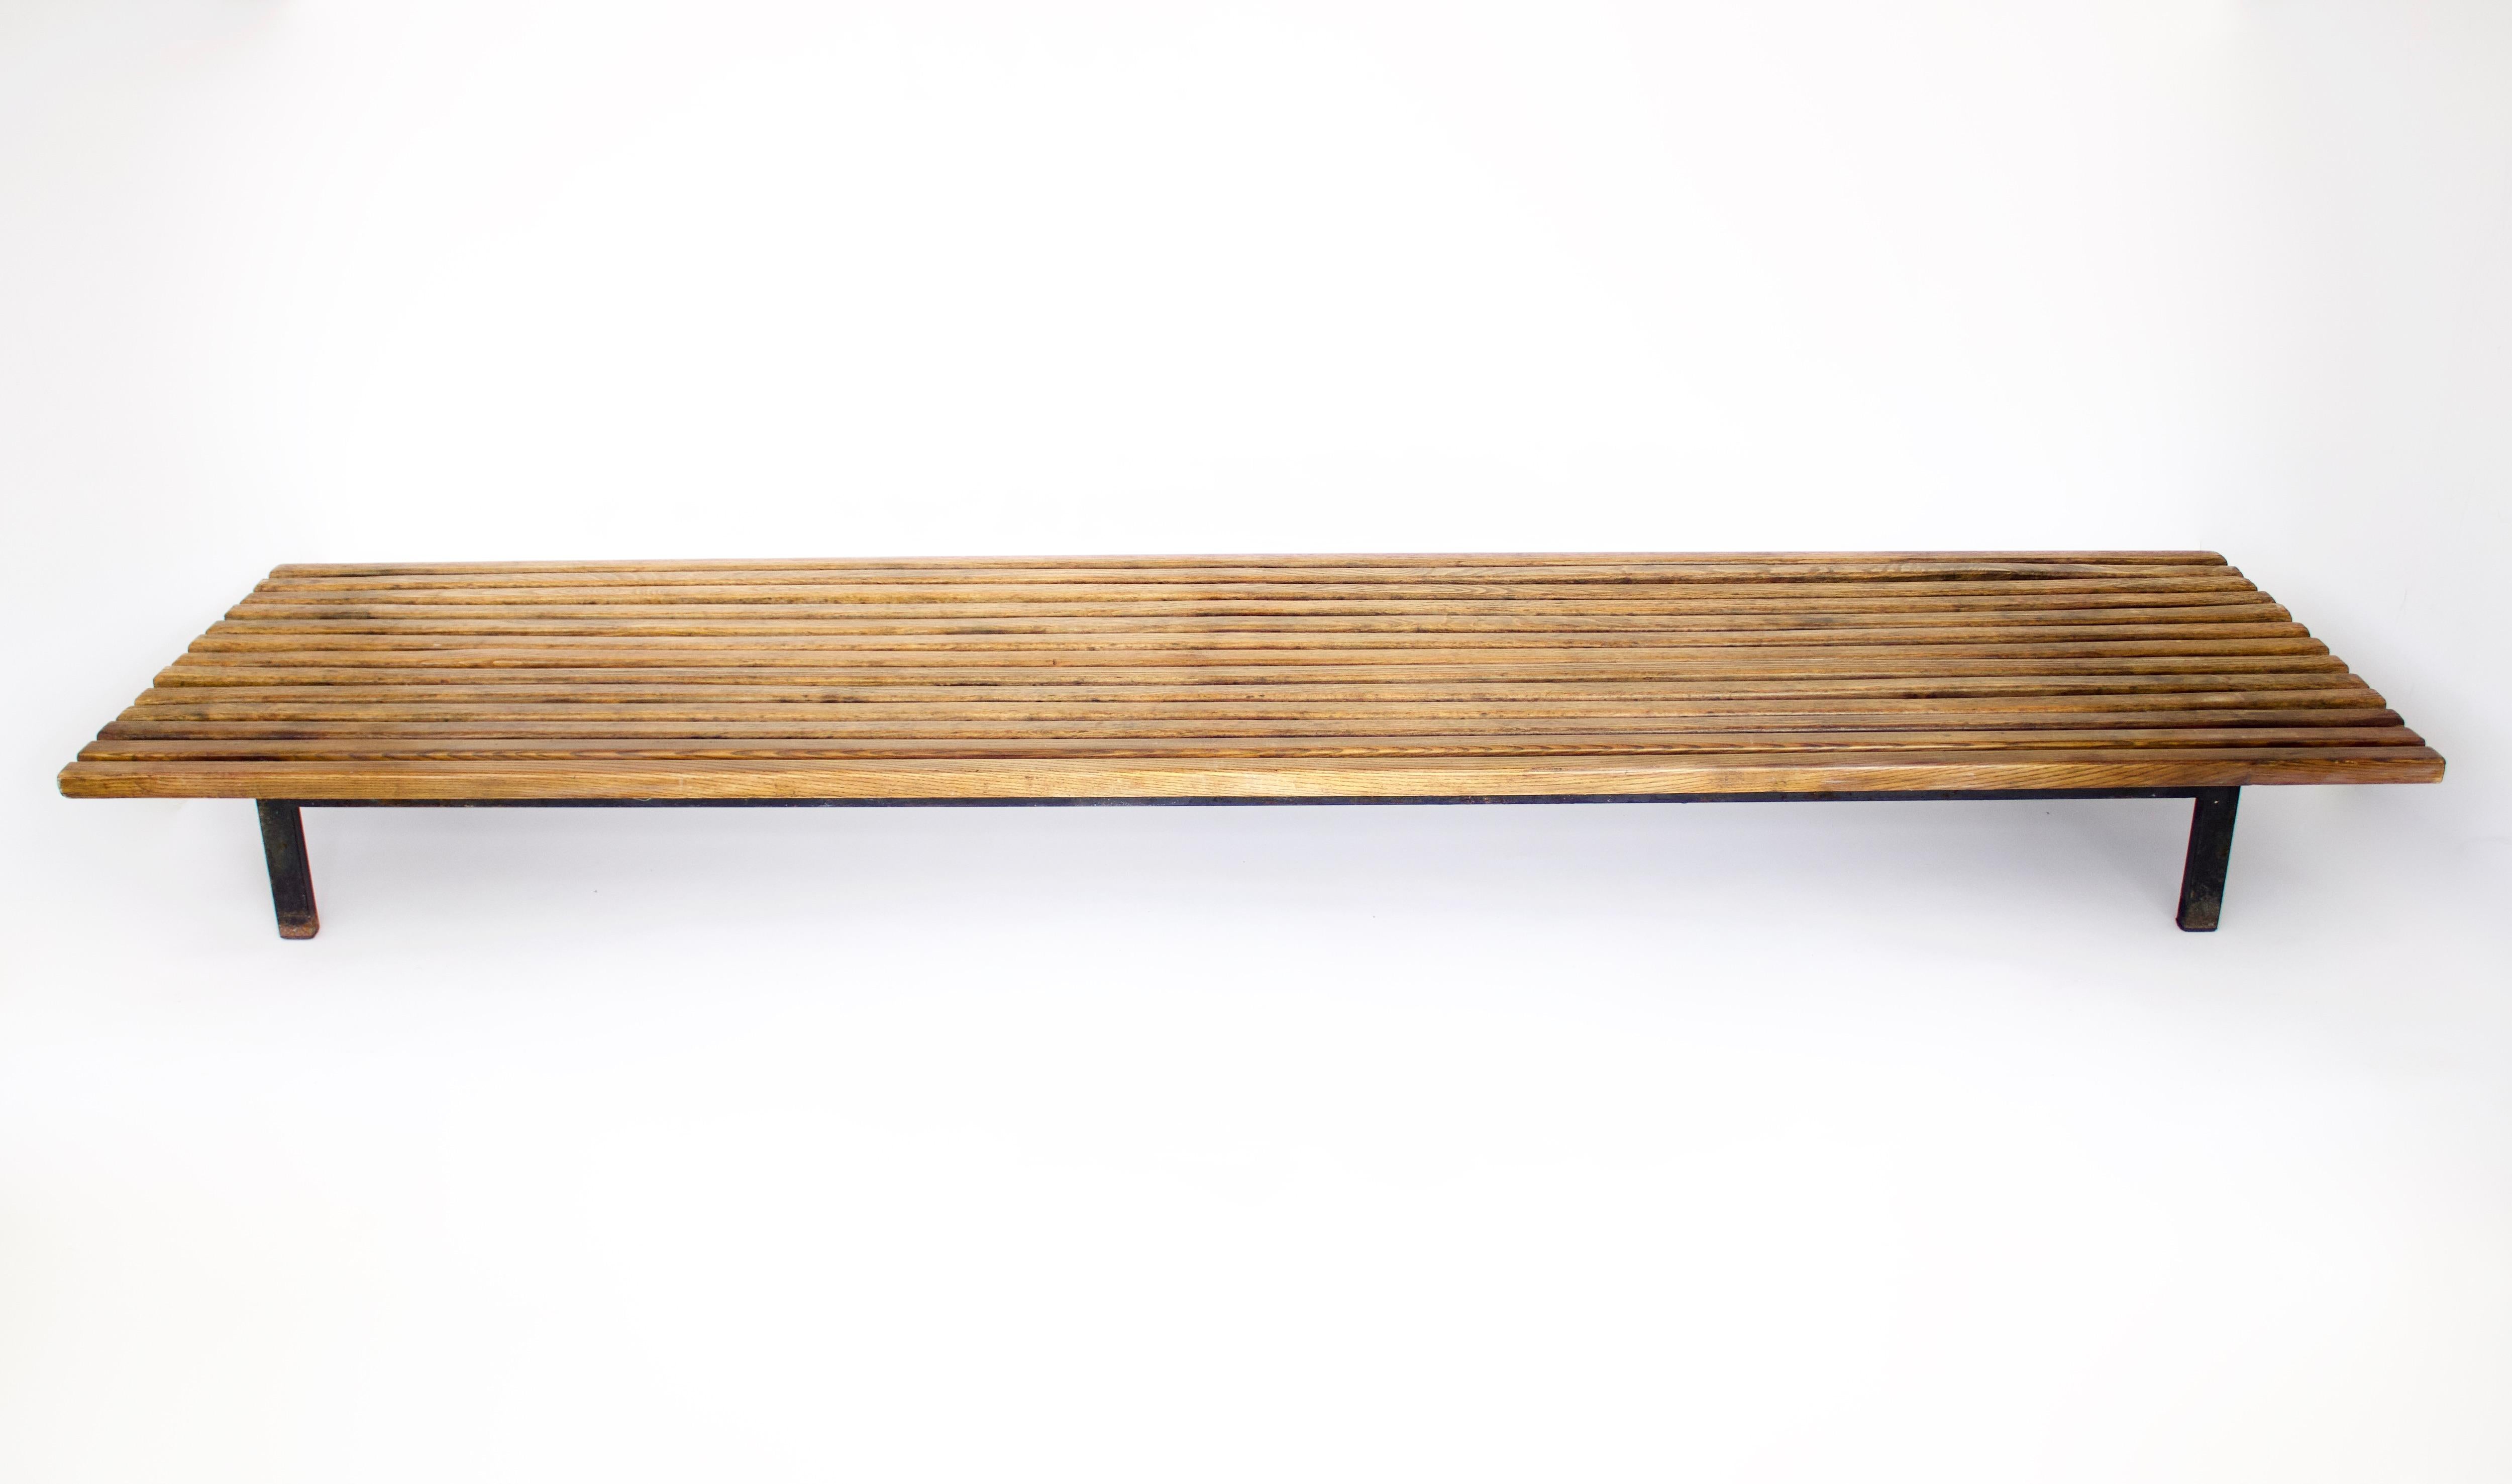 Bench designed by Charlotte Perriand, circa 1950. 
Wood, lacquered metal frame and legs. 
Provenance: Cansado, Mauritania (Africa).
In original condition, with minor wear consistent with age and use, preserving a beautiful patina. The wood has